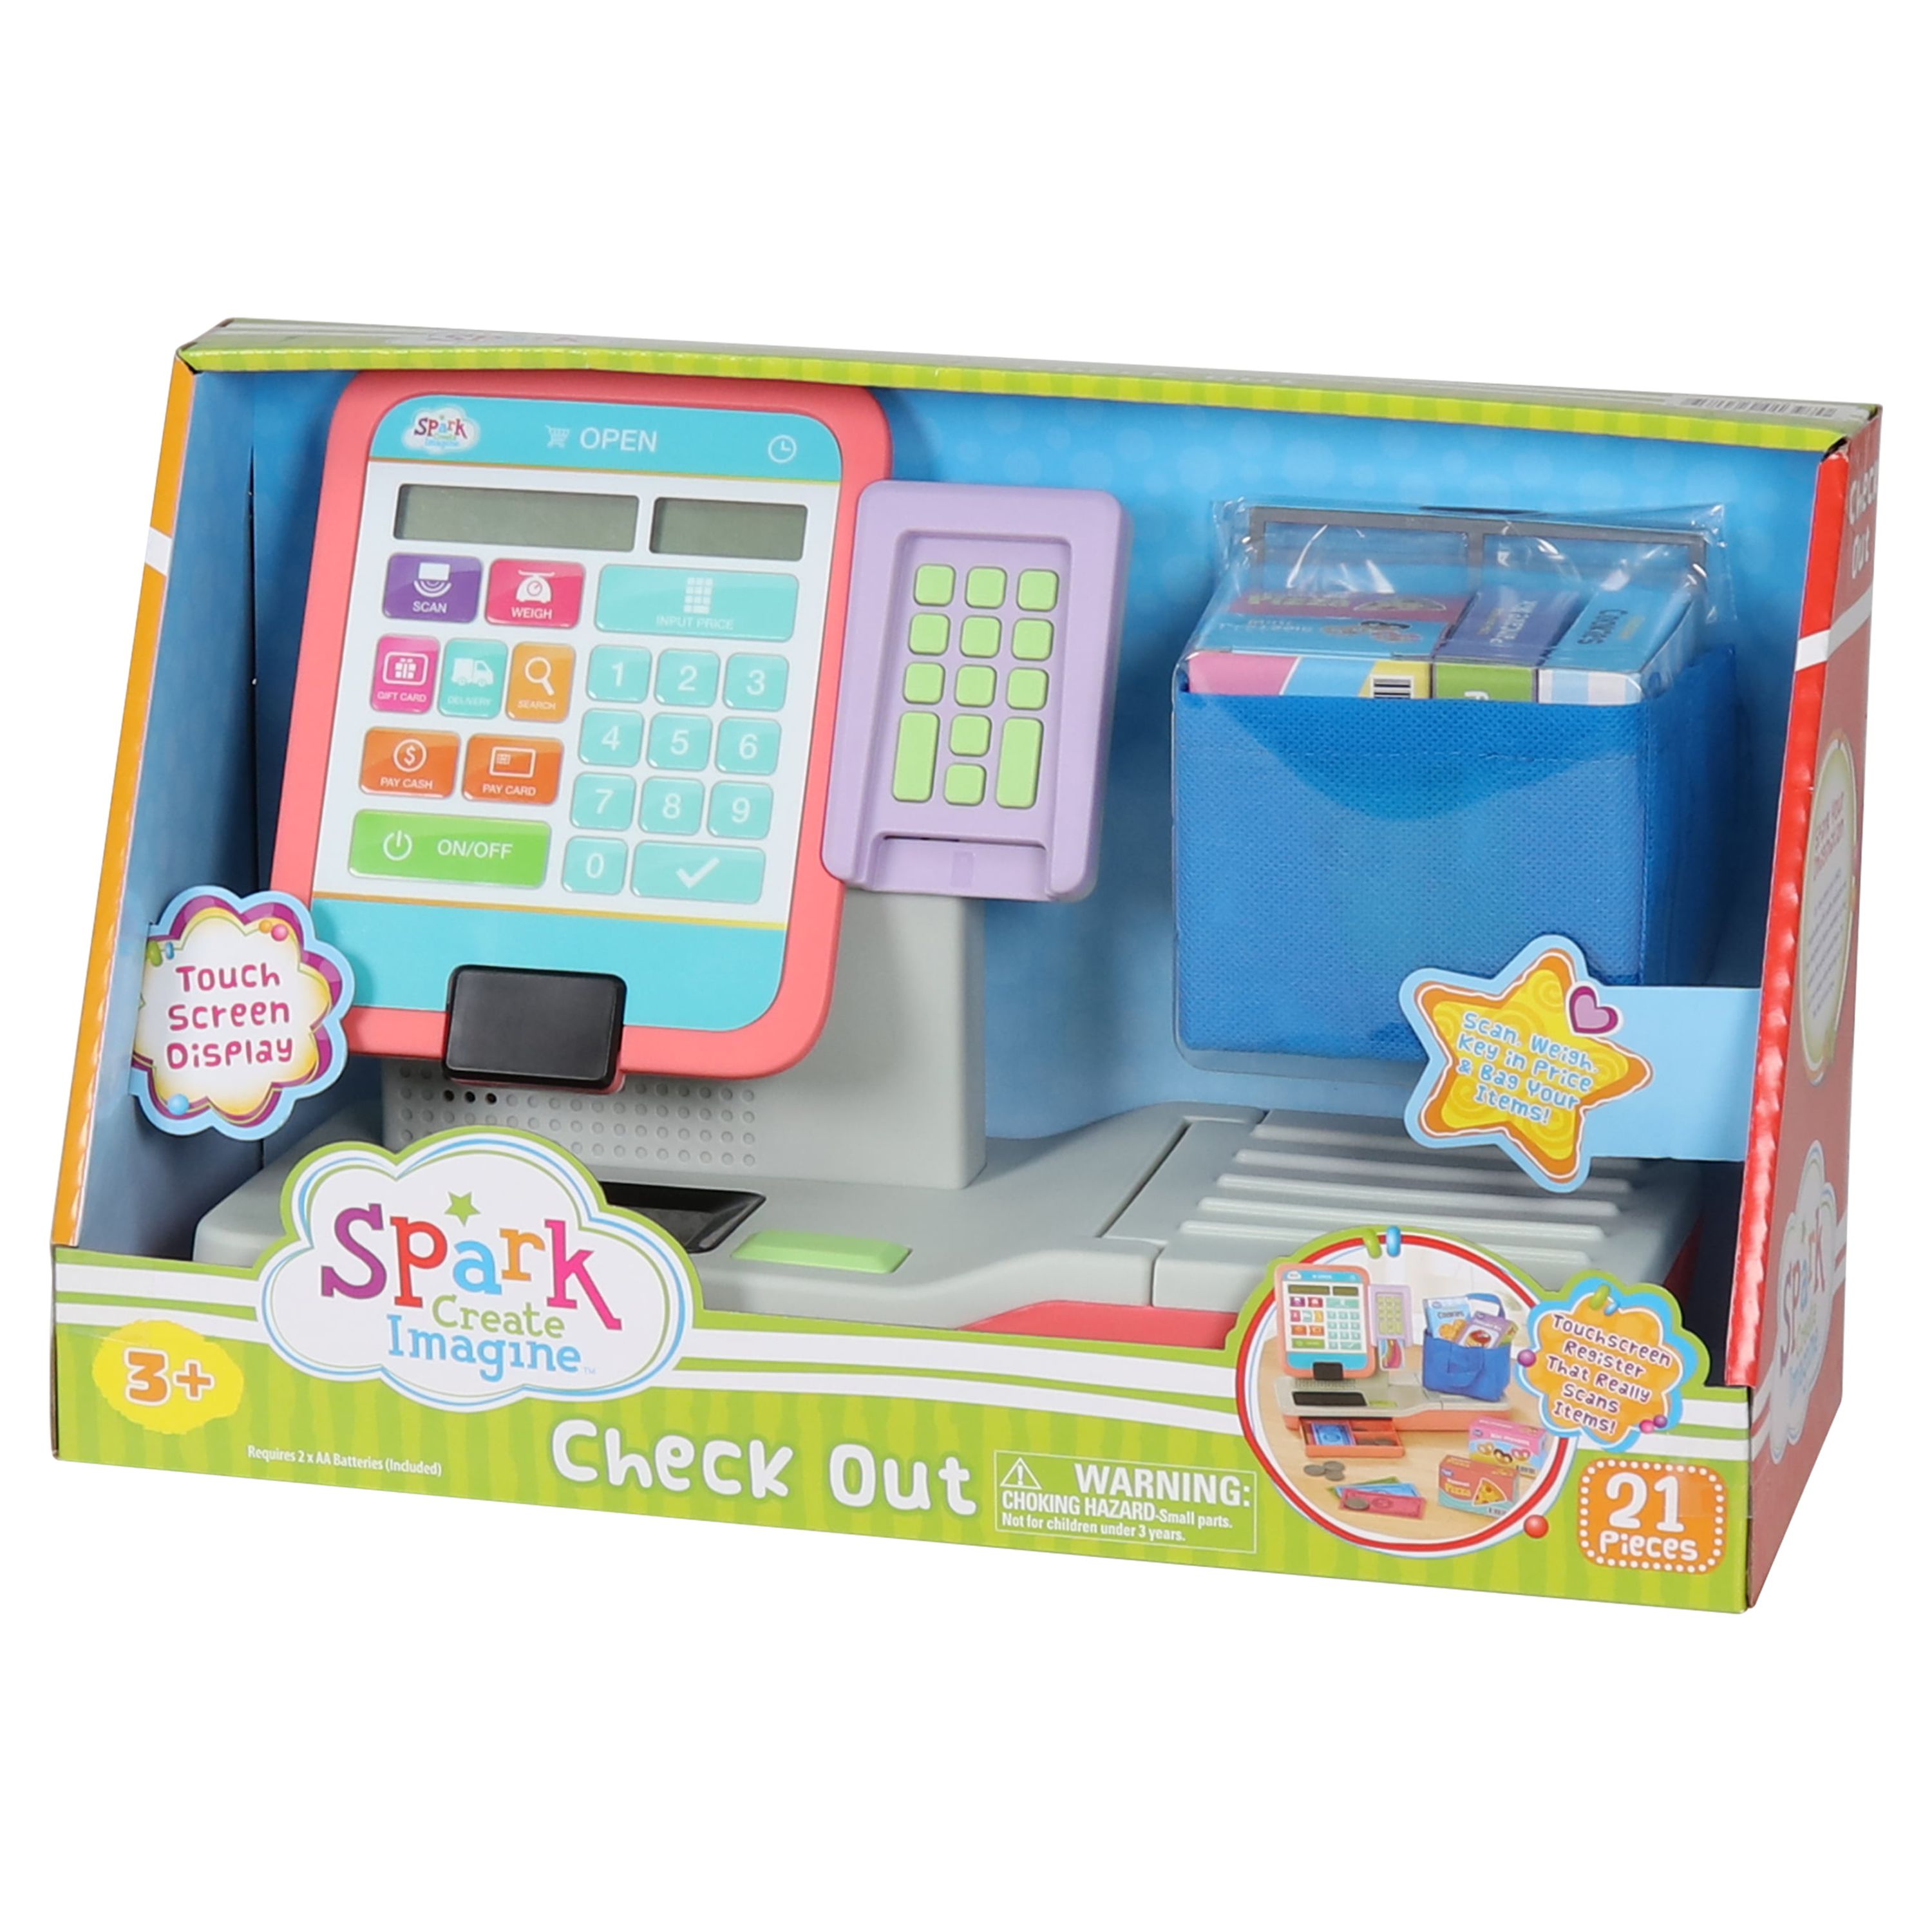 Spark Create Imagine Check Out Station Play Cash Register with Play Money, 21 Pieces - image 4 of 6